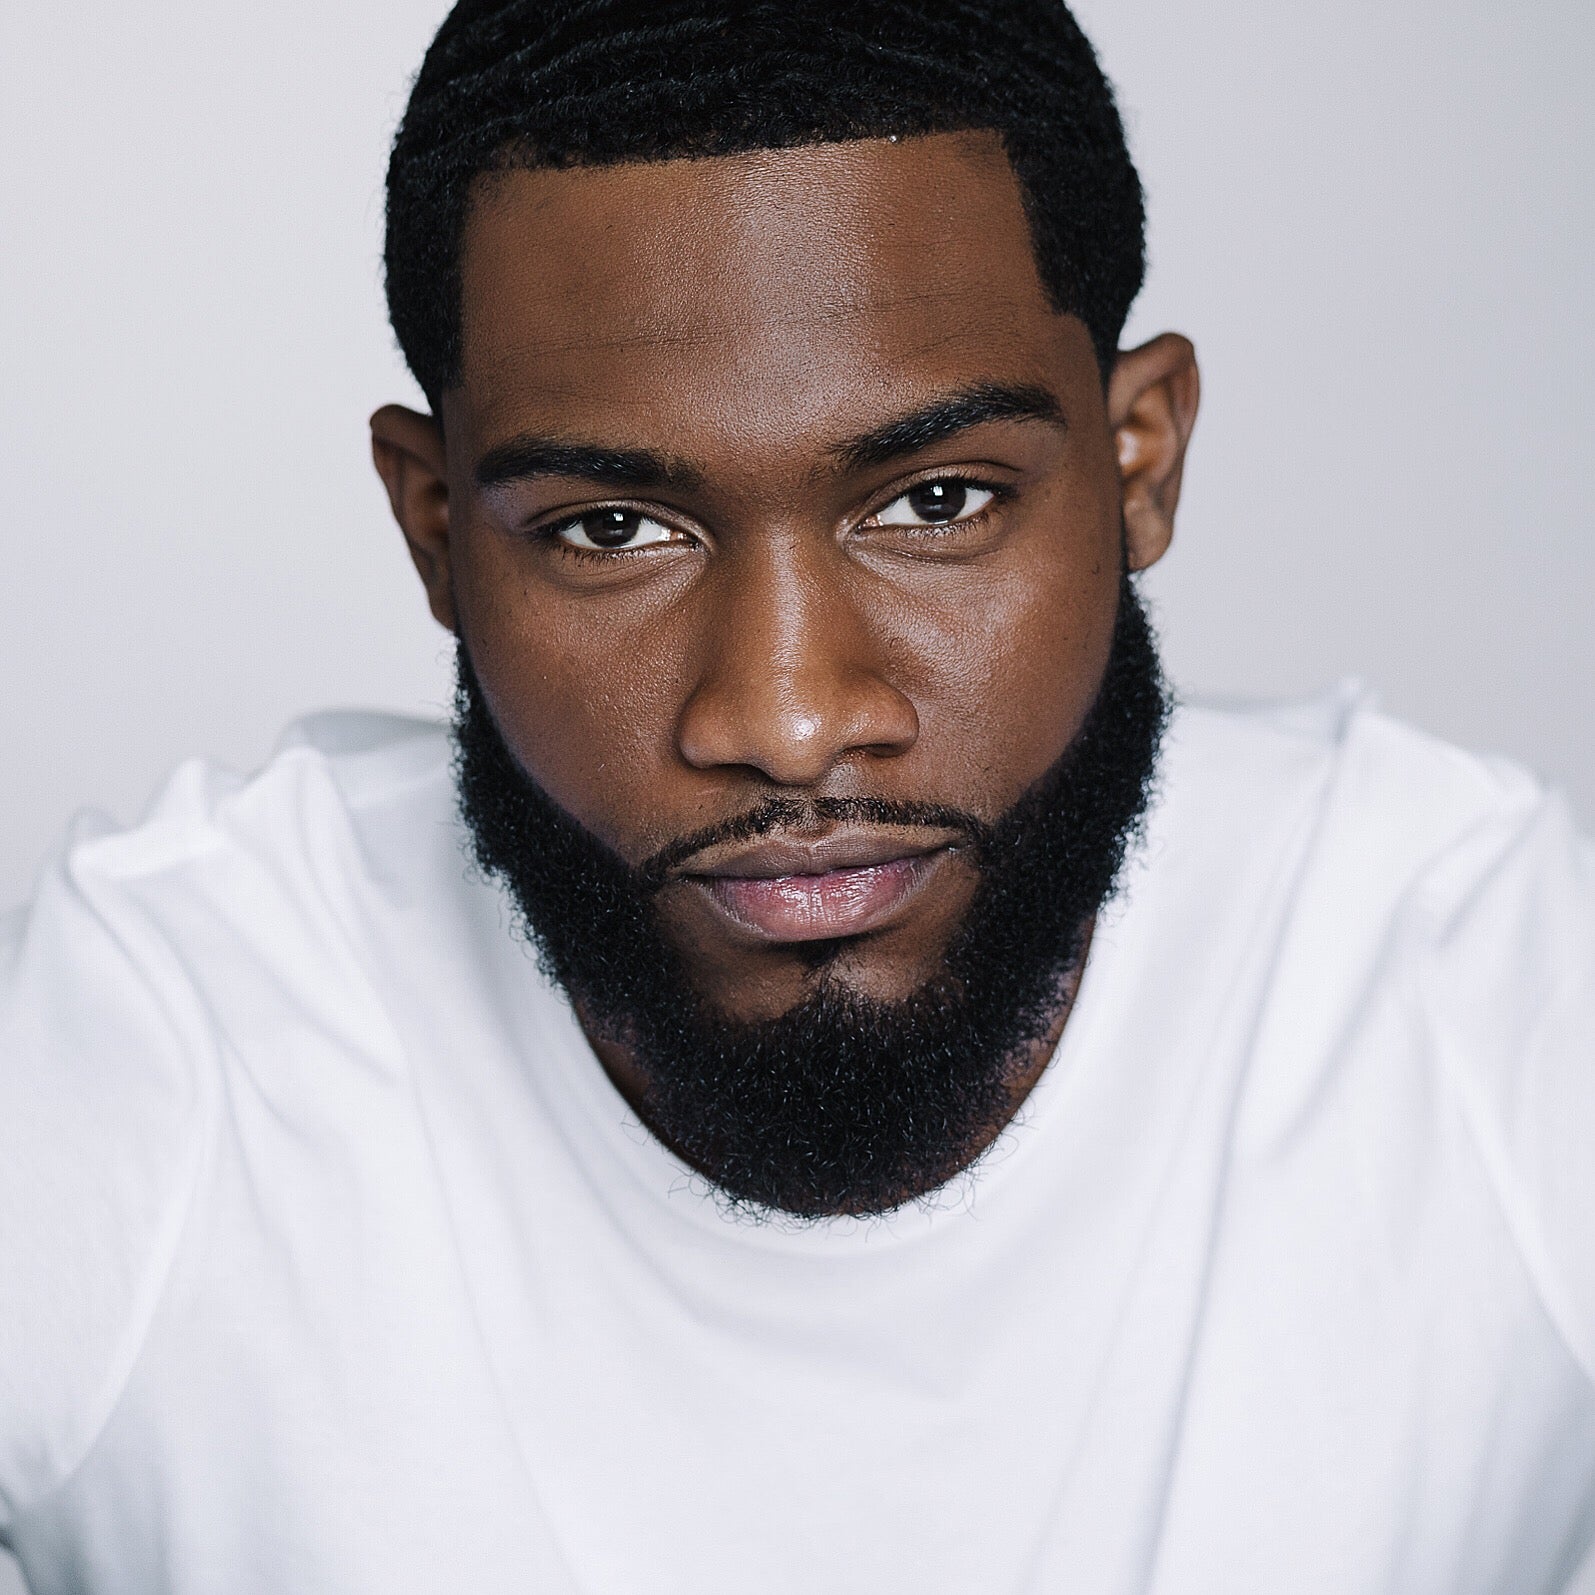 Bearded Bae Shania Knight Is Certified Hot Chocolate and He Will Make Your Morning
